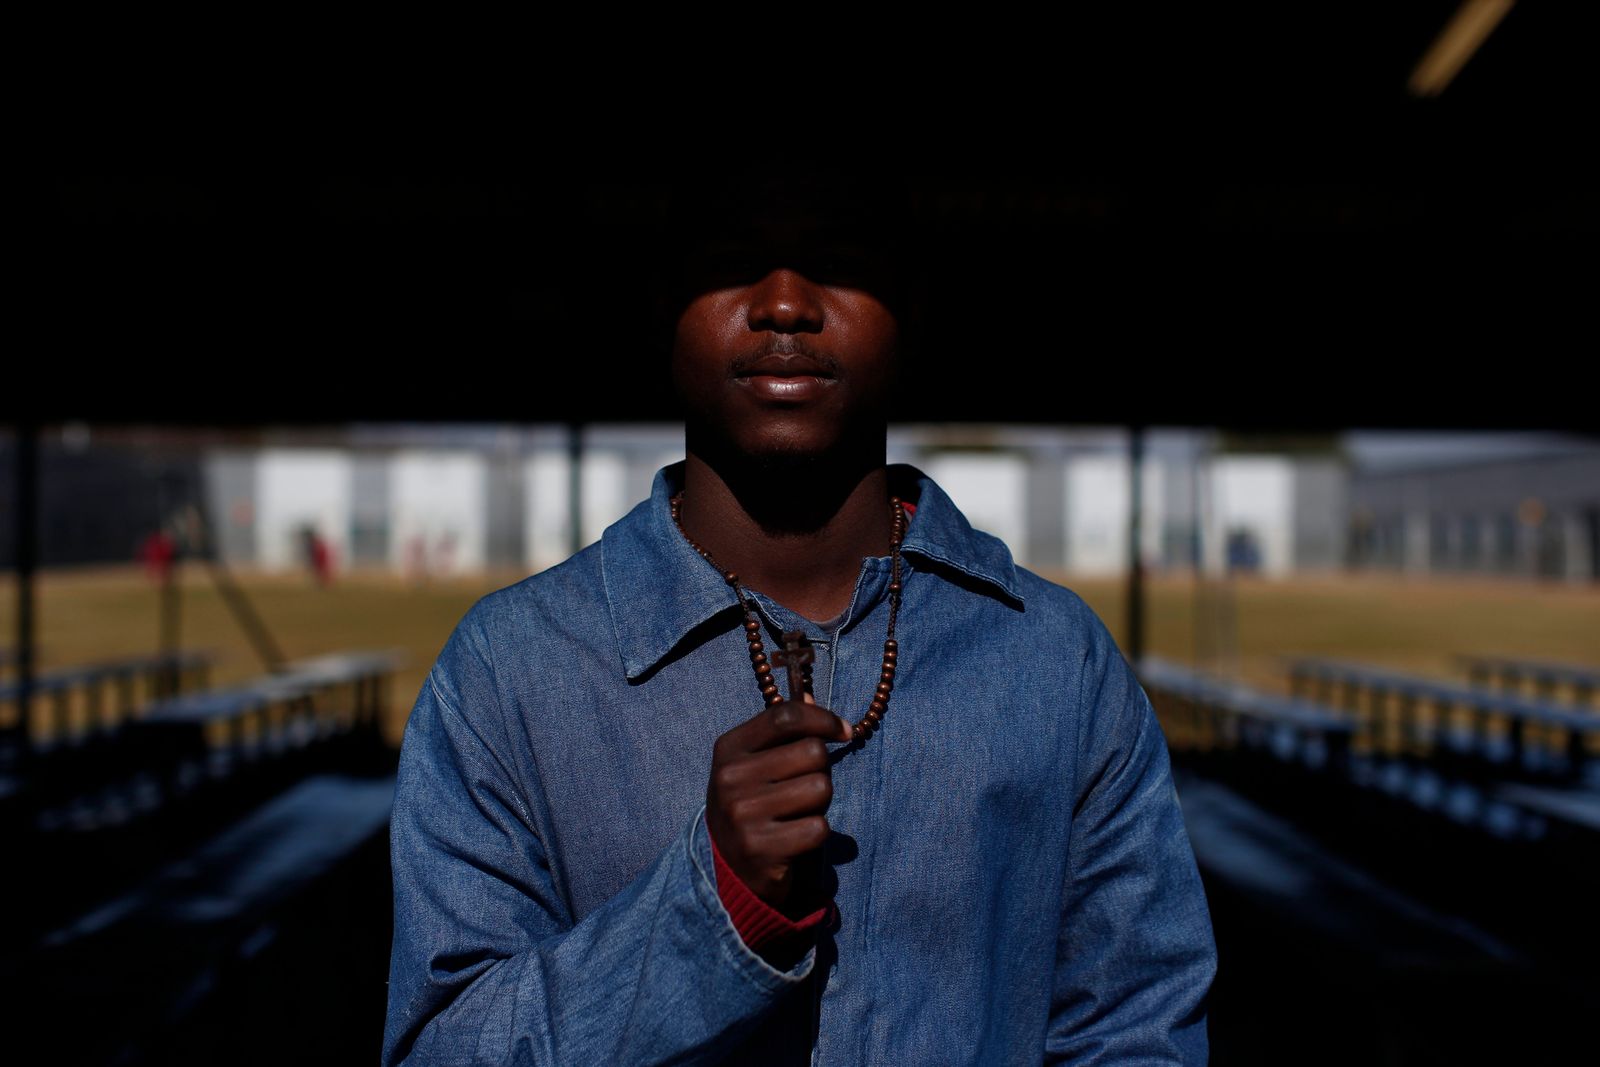 © Ilvy Njiokiktjien - A young prisoner in a youth prison north of Johannesburg, South Africa.